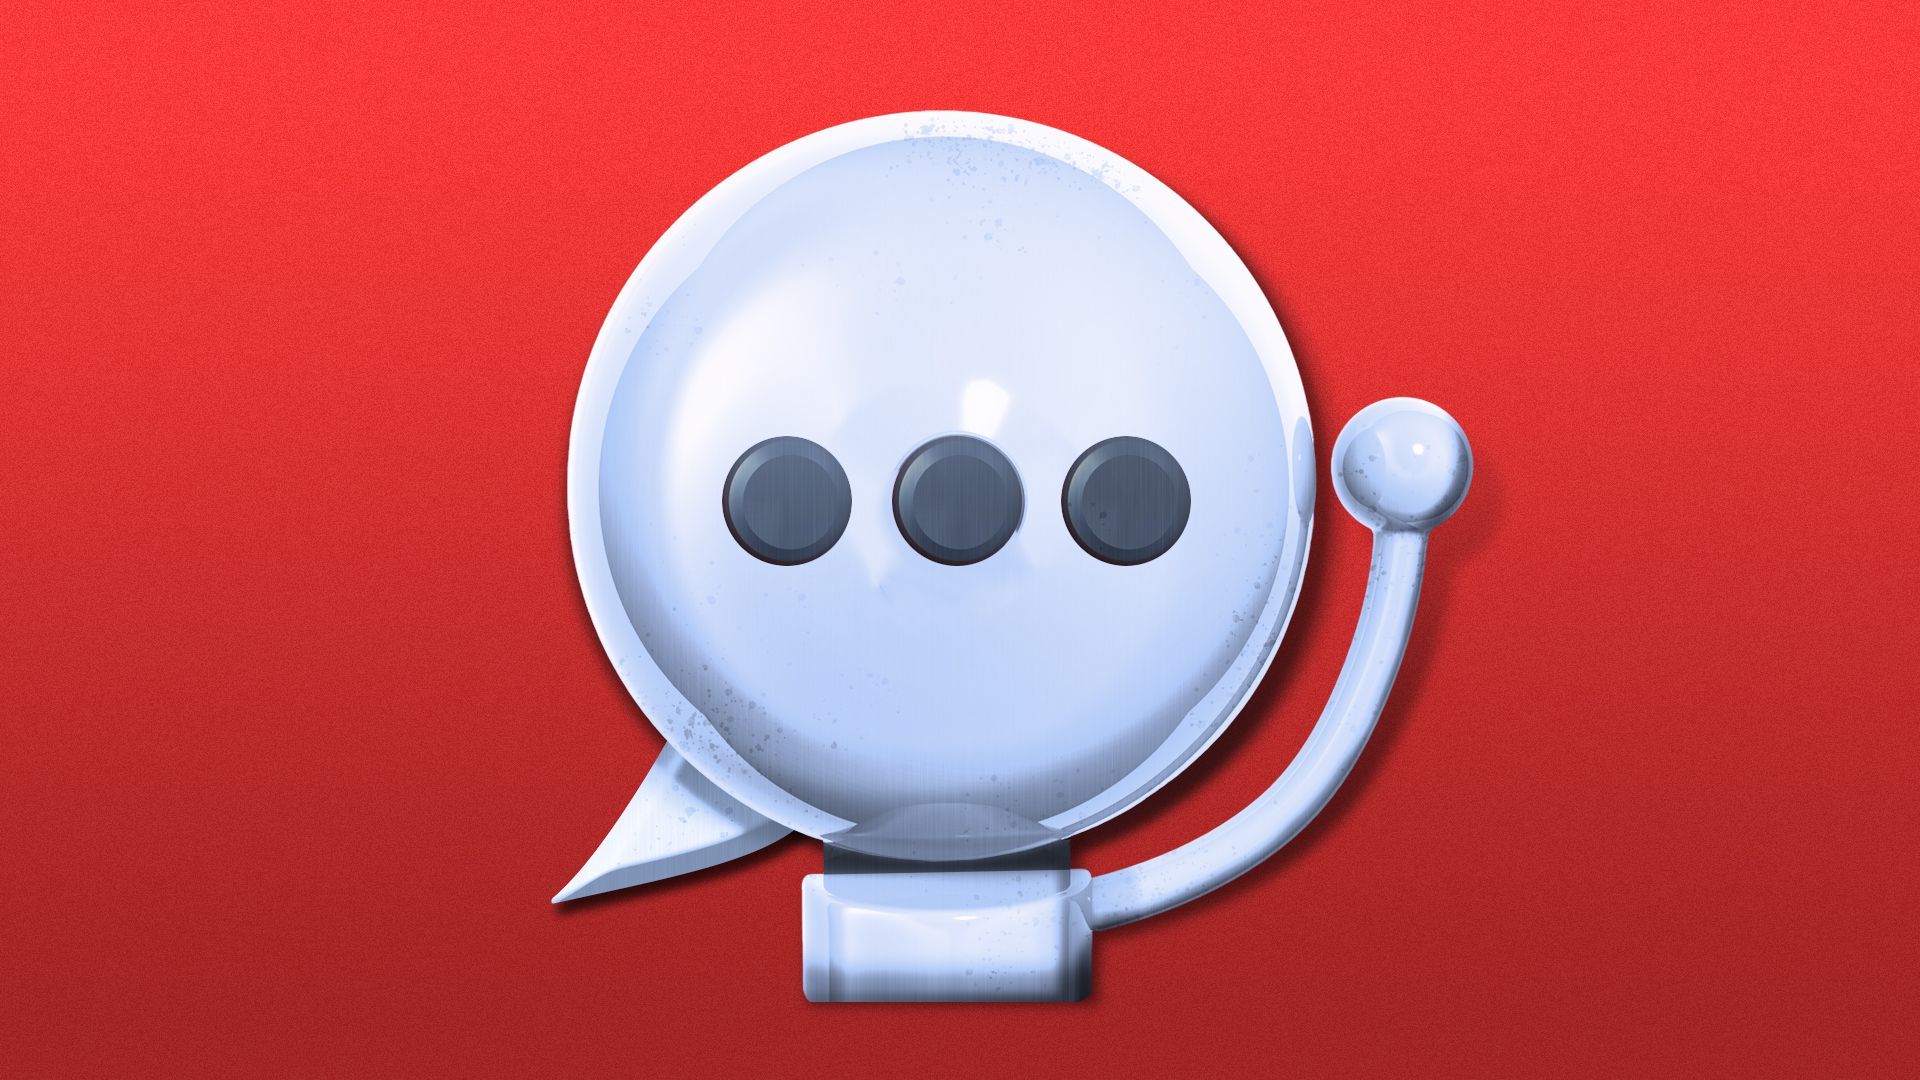 Illustration of a boxing bell as a chat icon